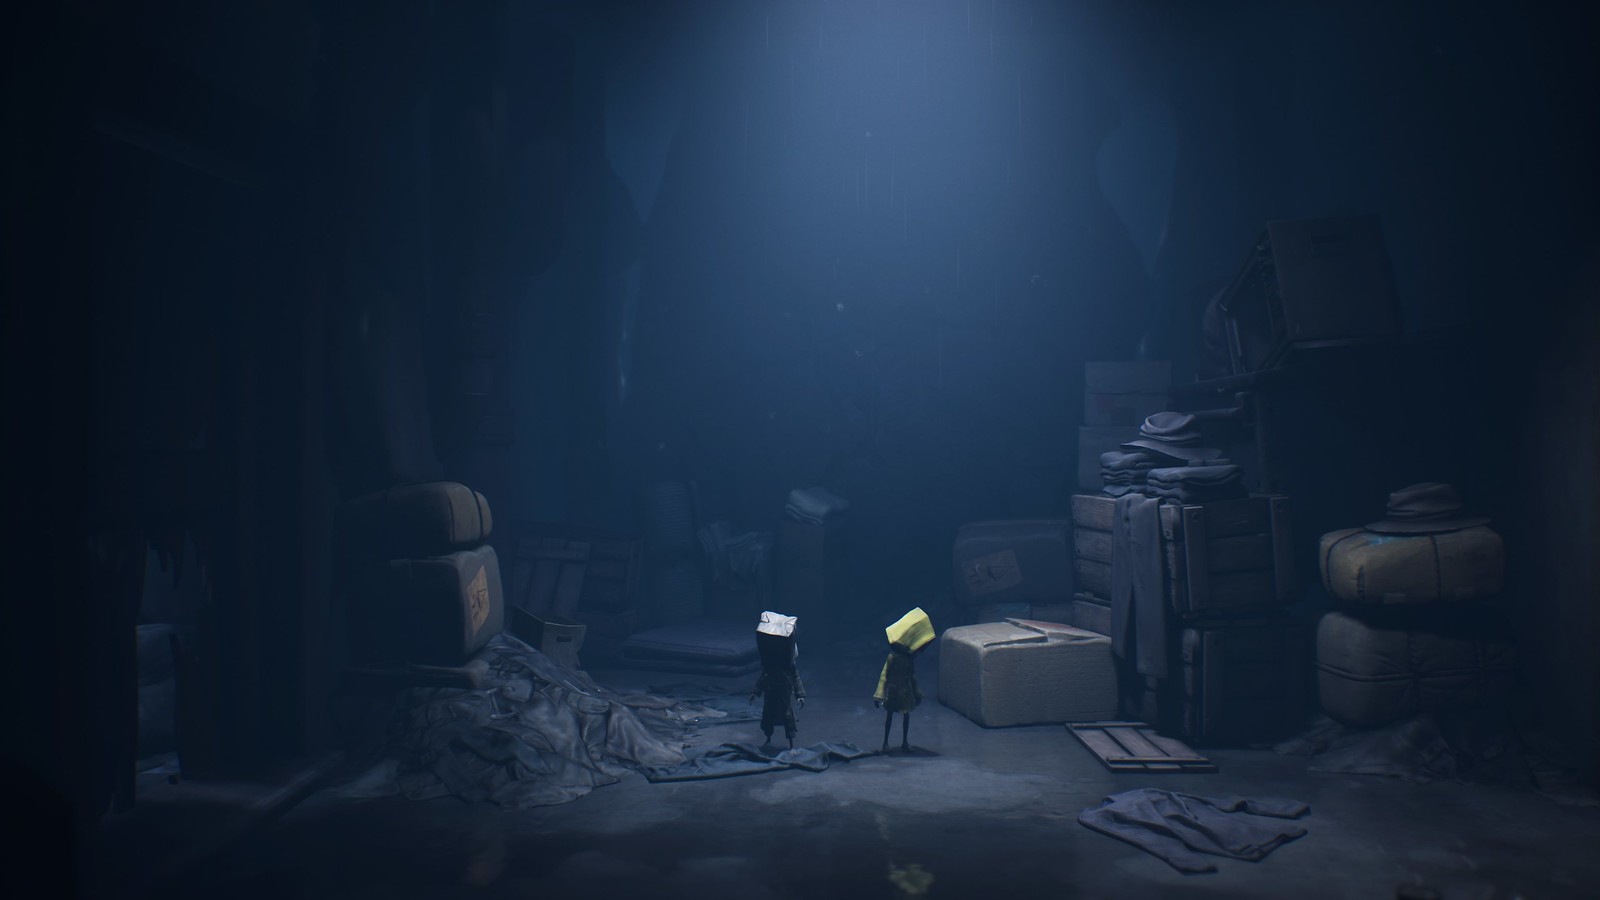 Little Nightmares 2: Enhanced Edition is out now on PS5 and Xbox Series X/S